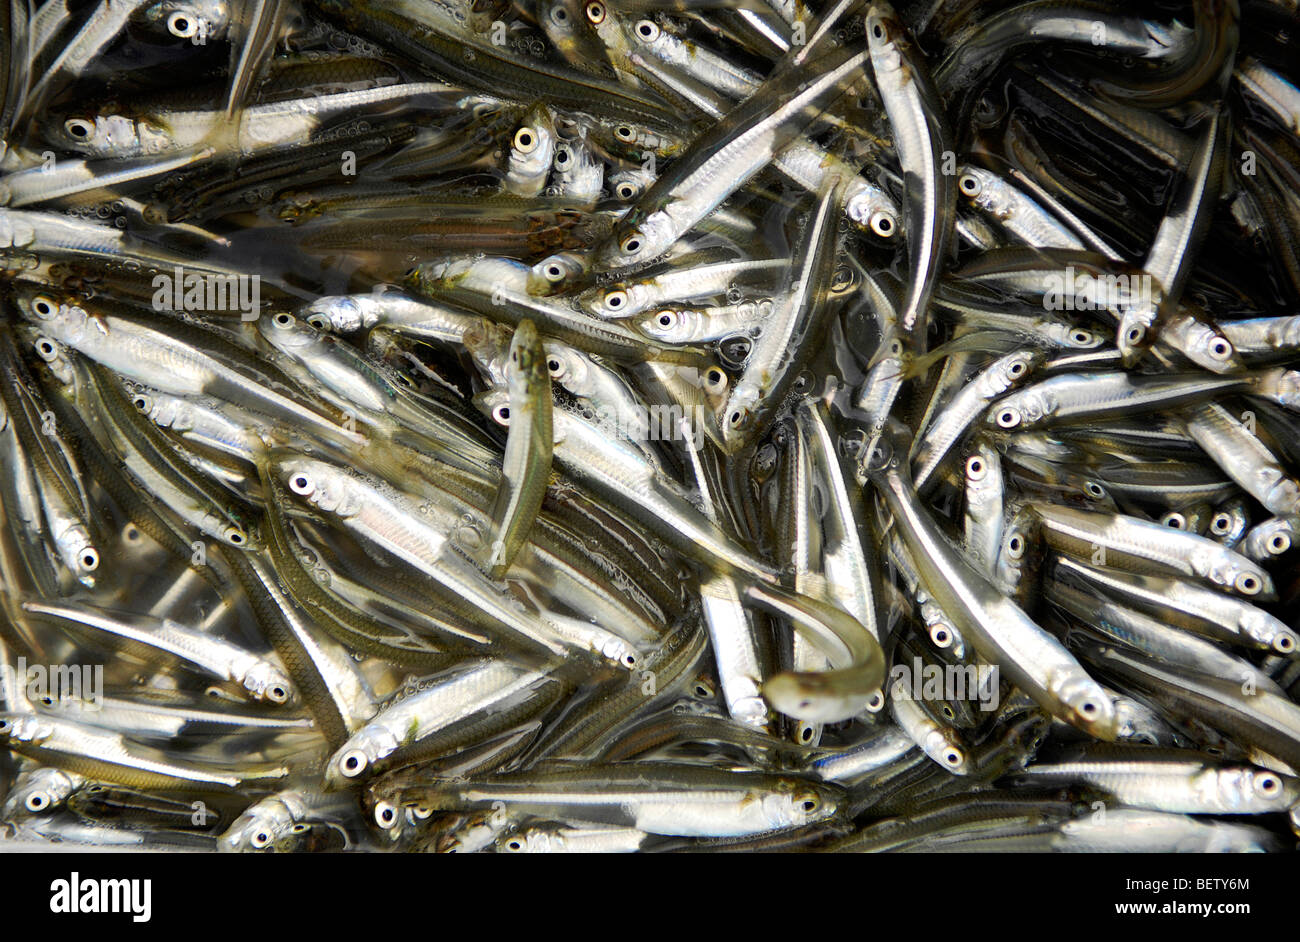 Small fish that have been caught in a net Stock Photo - Alamy